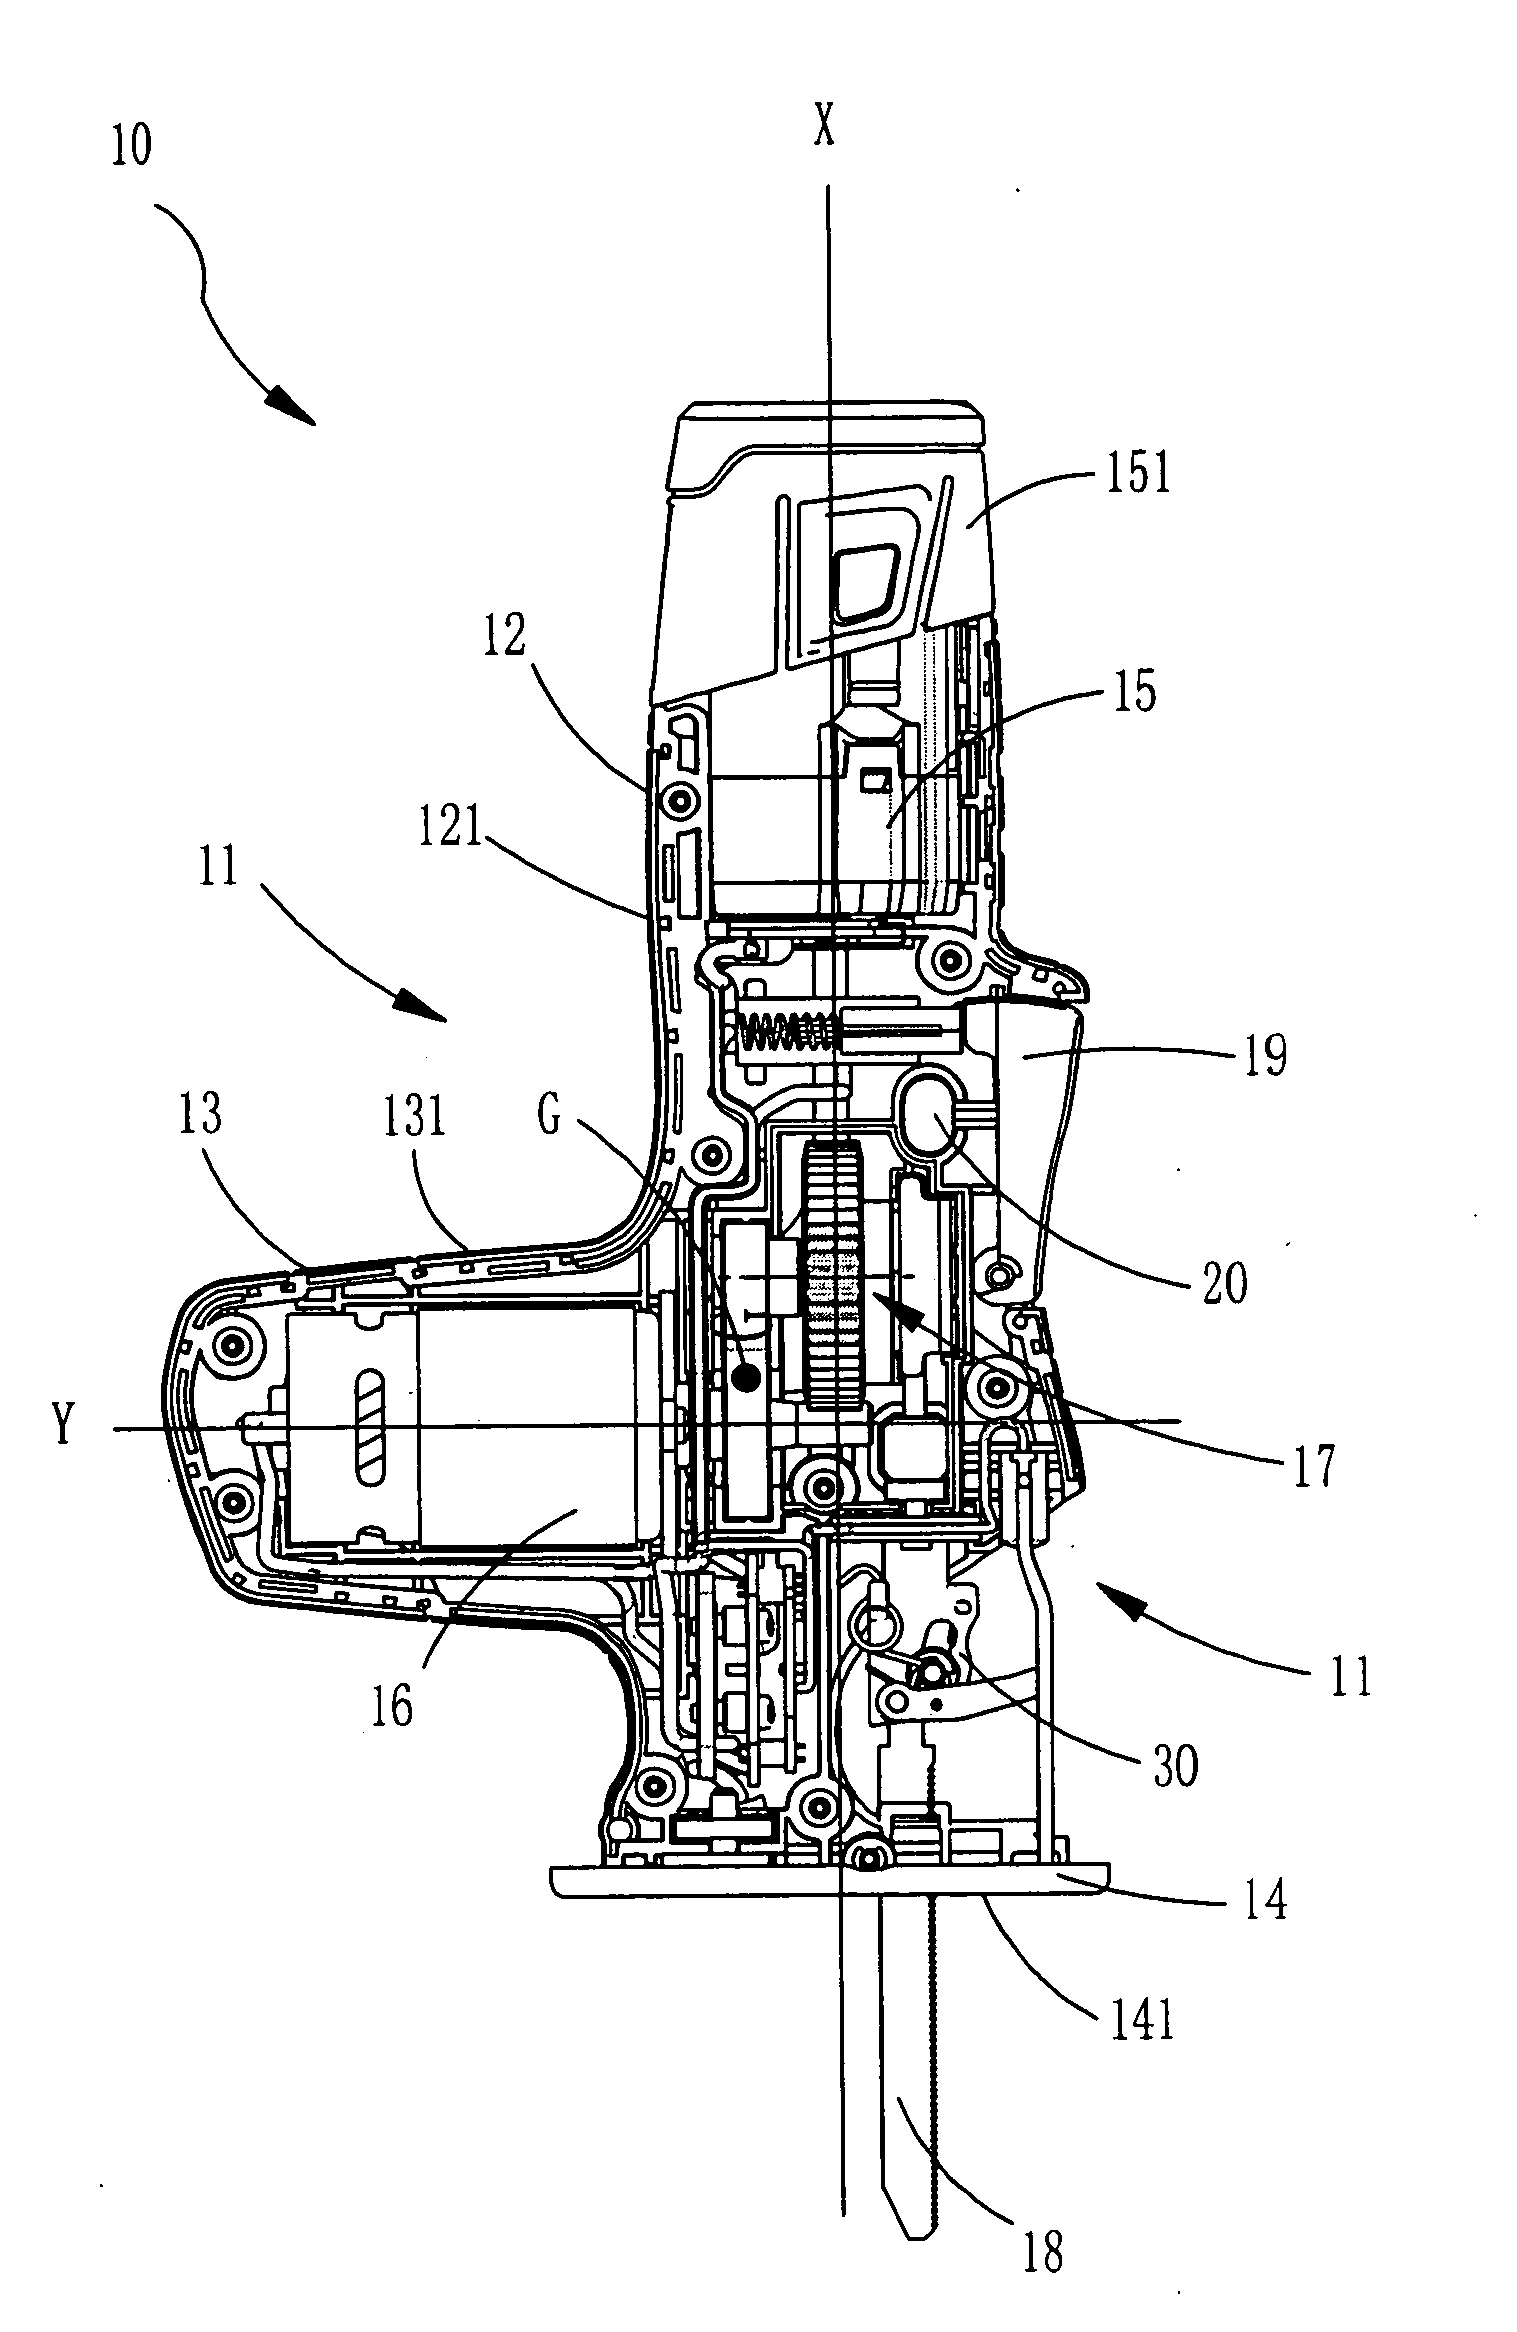 Handheld reciprocating saw and the operating method thereof